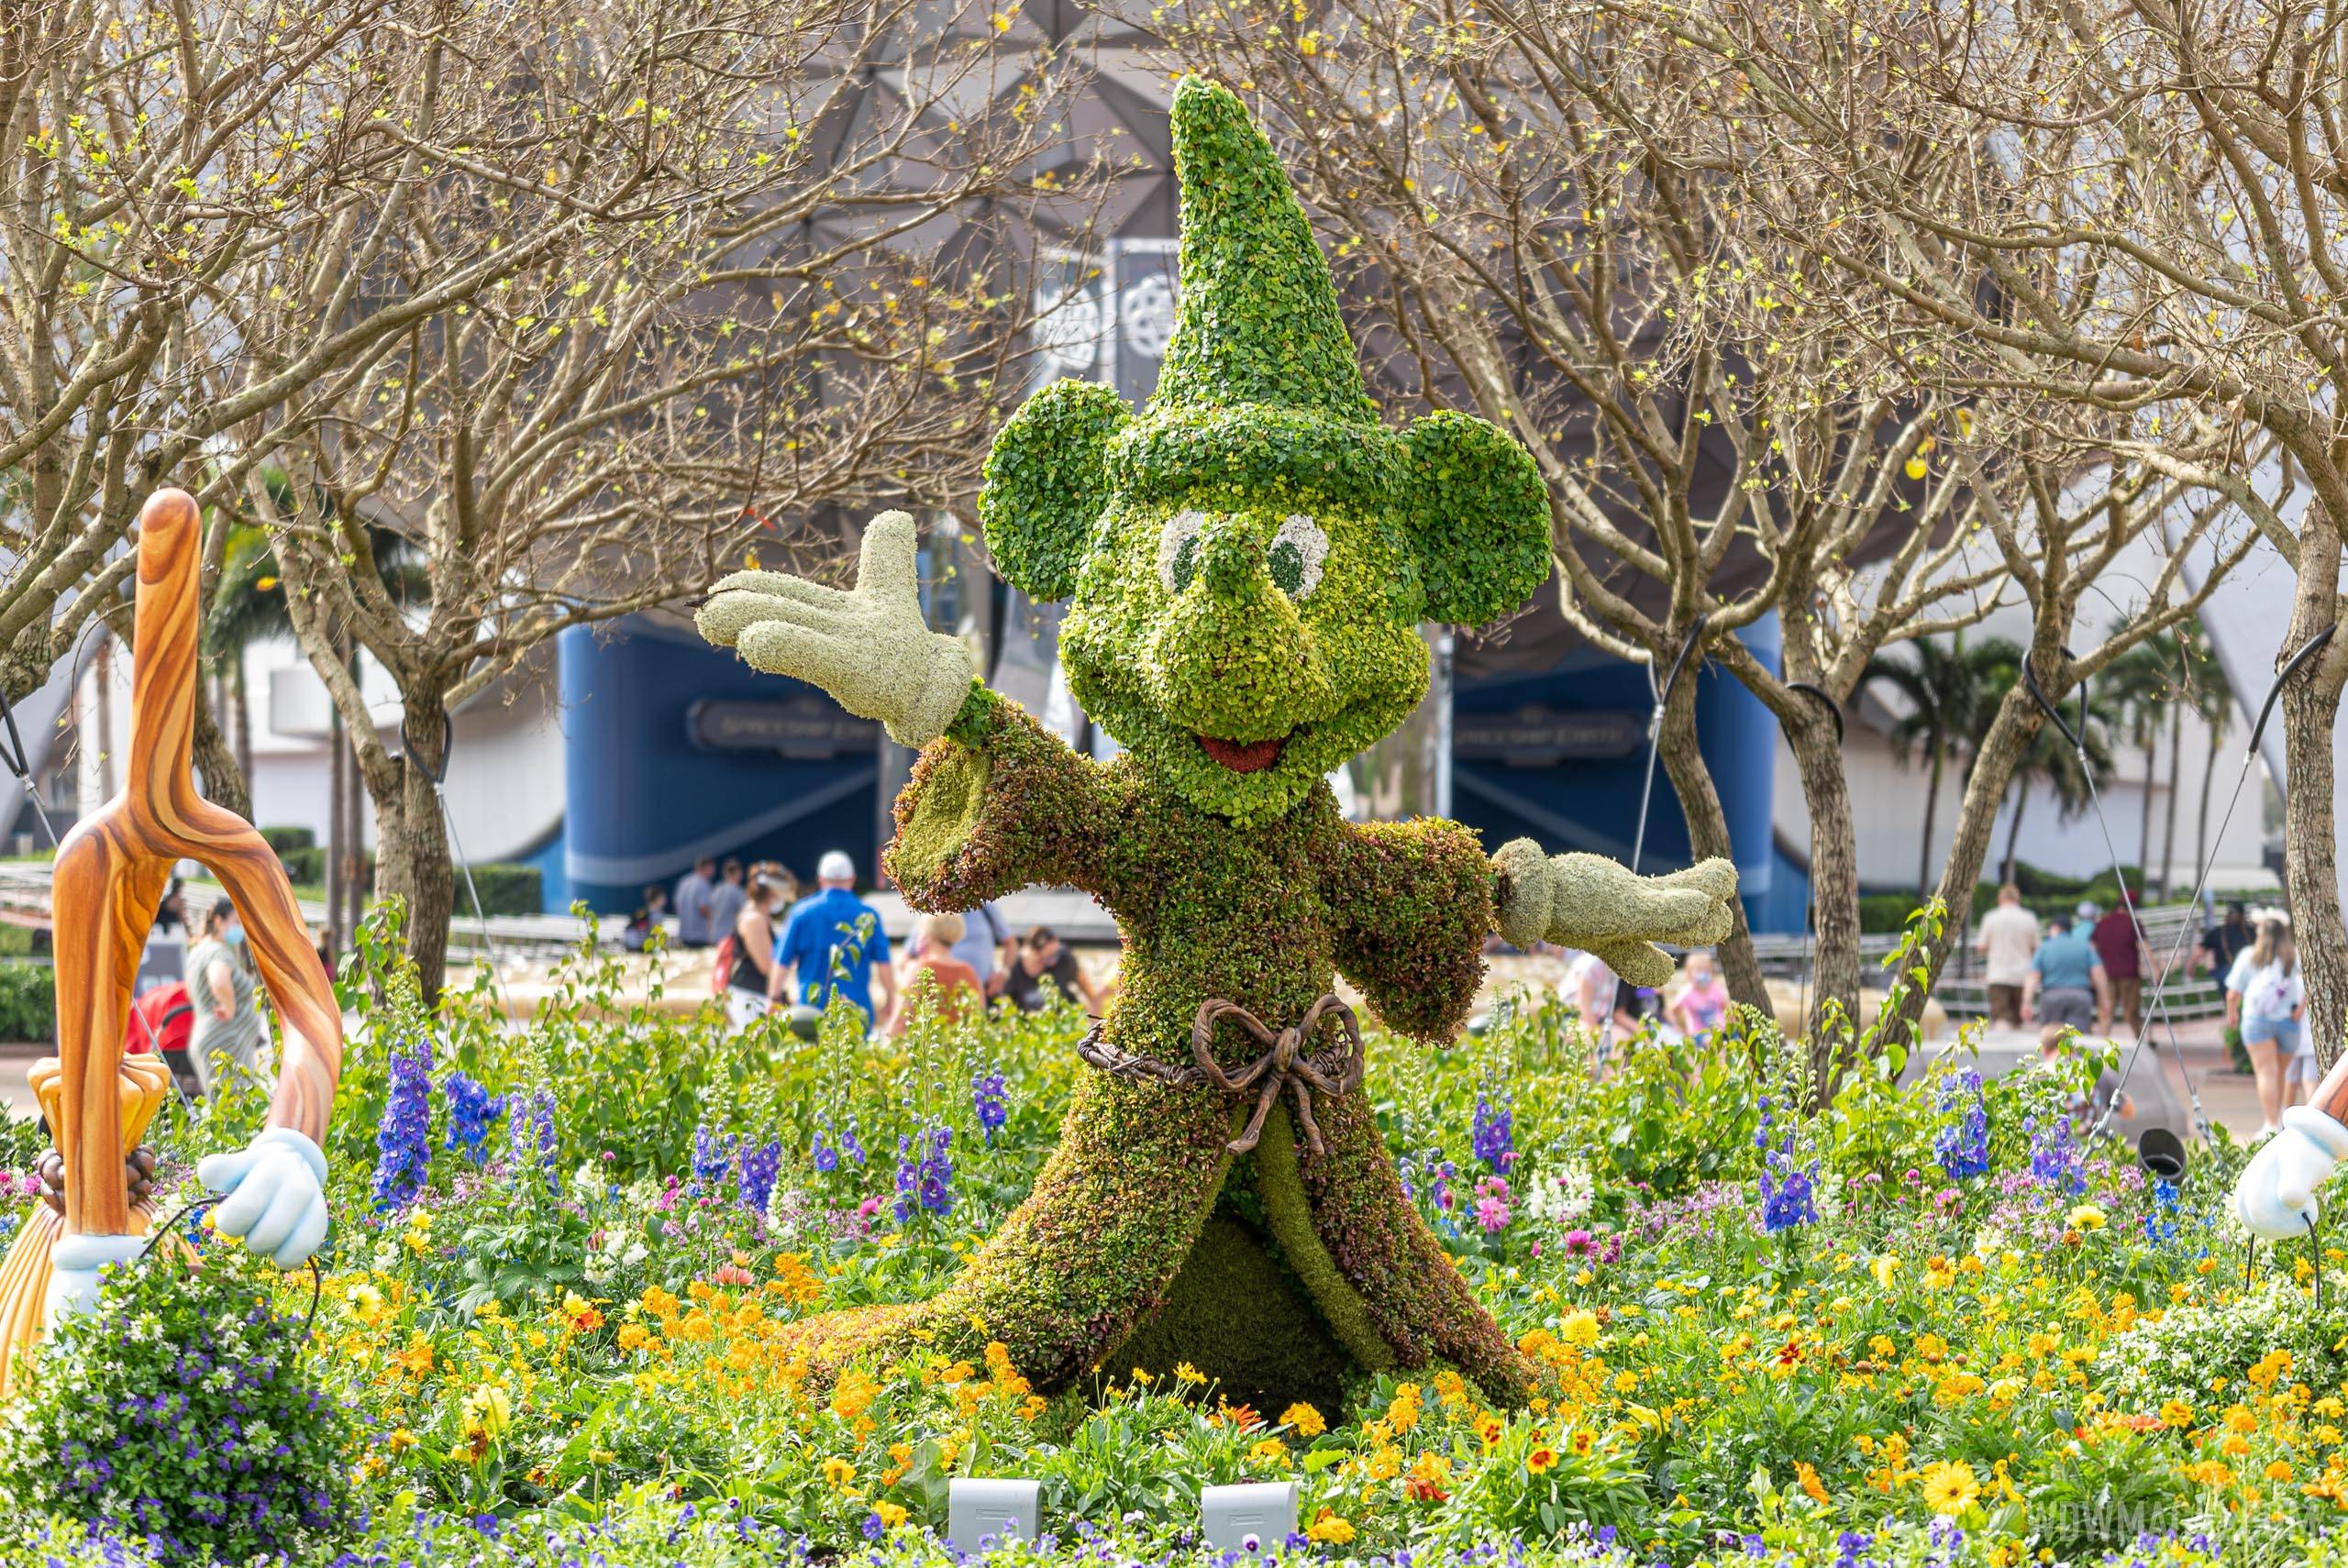 A new topiary will be on display at the park's main entrance